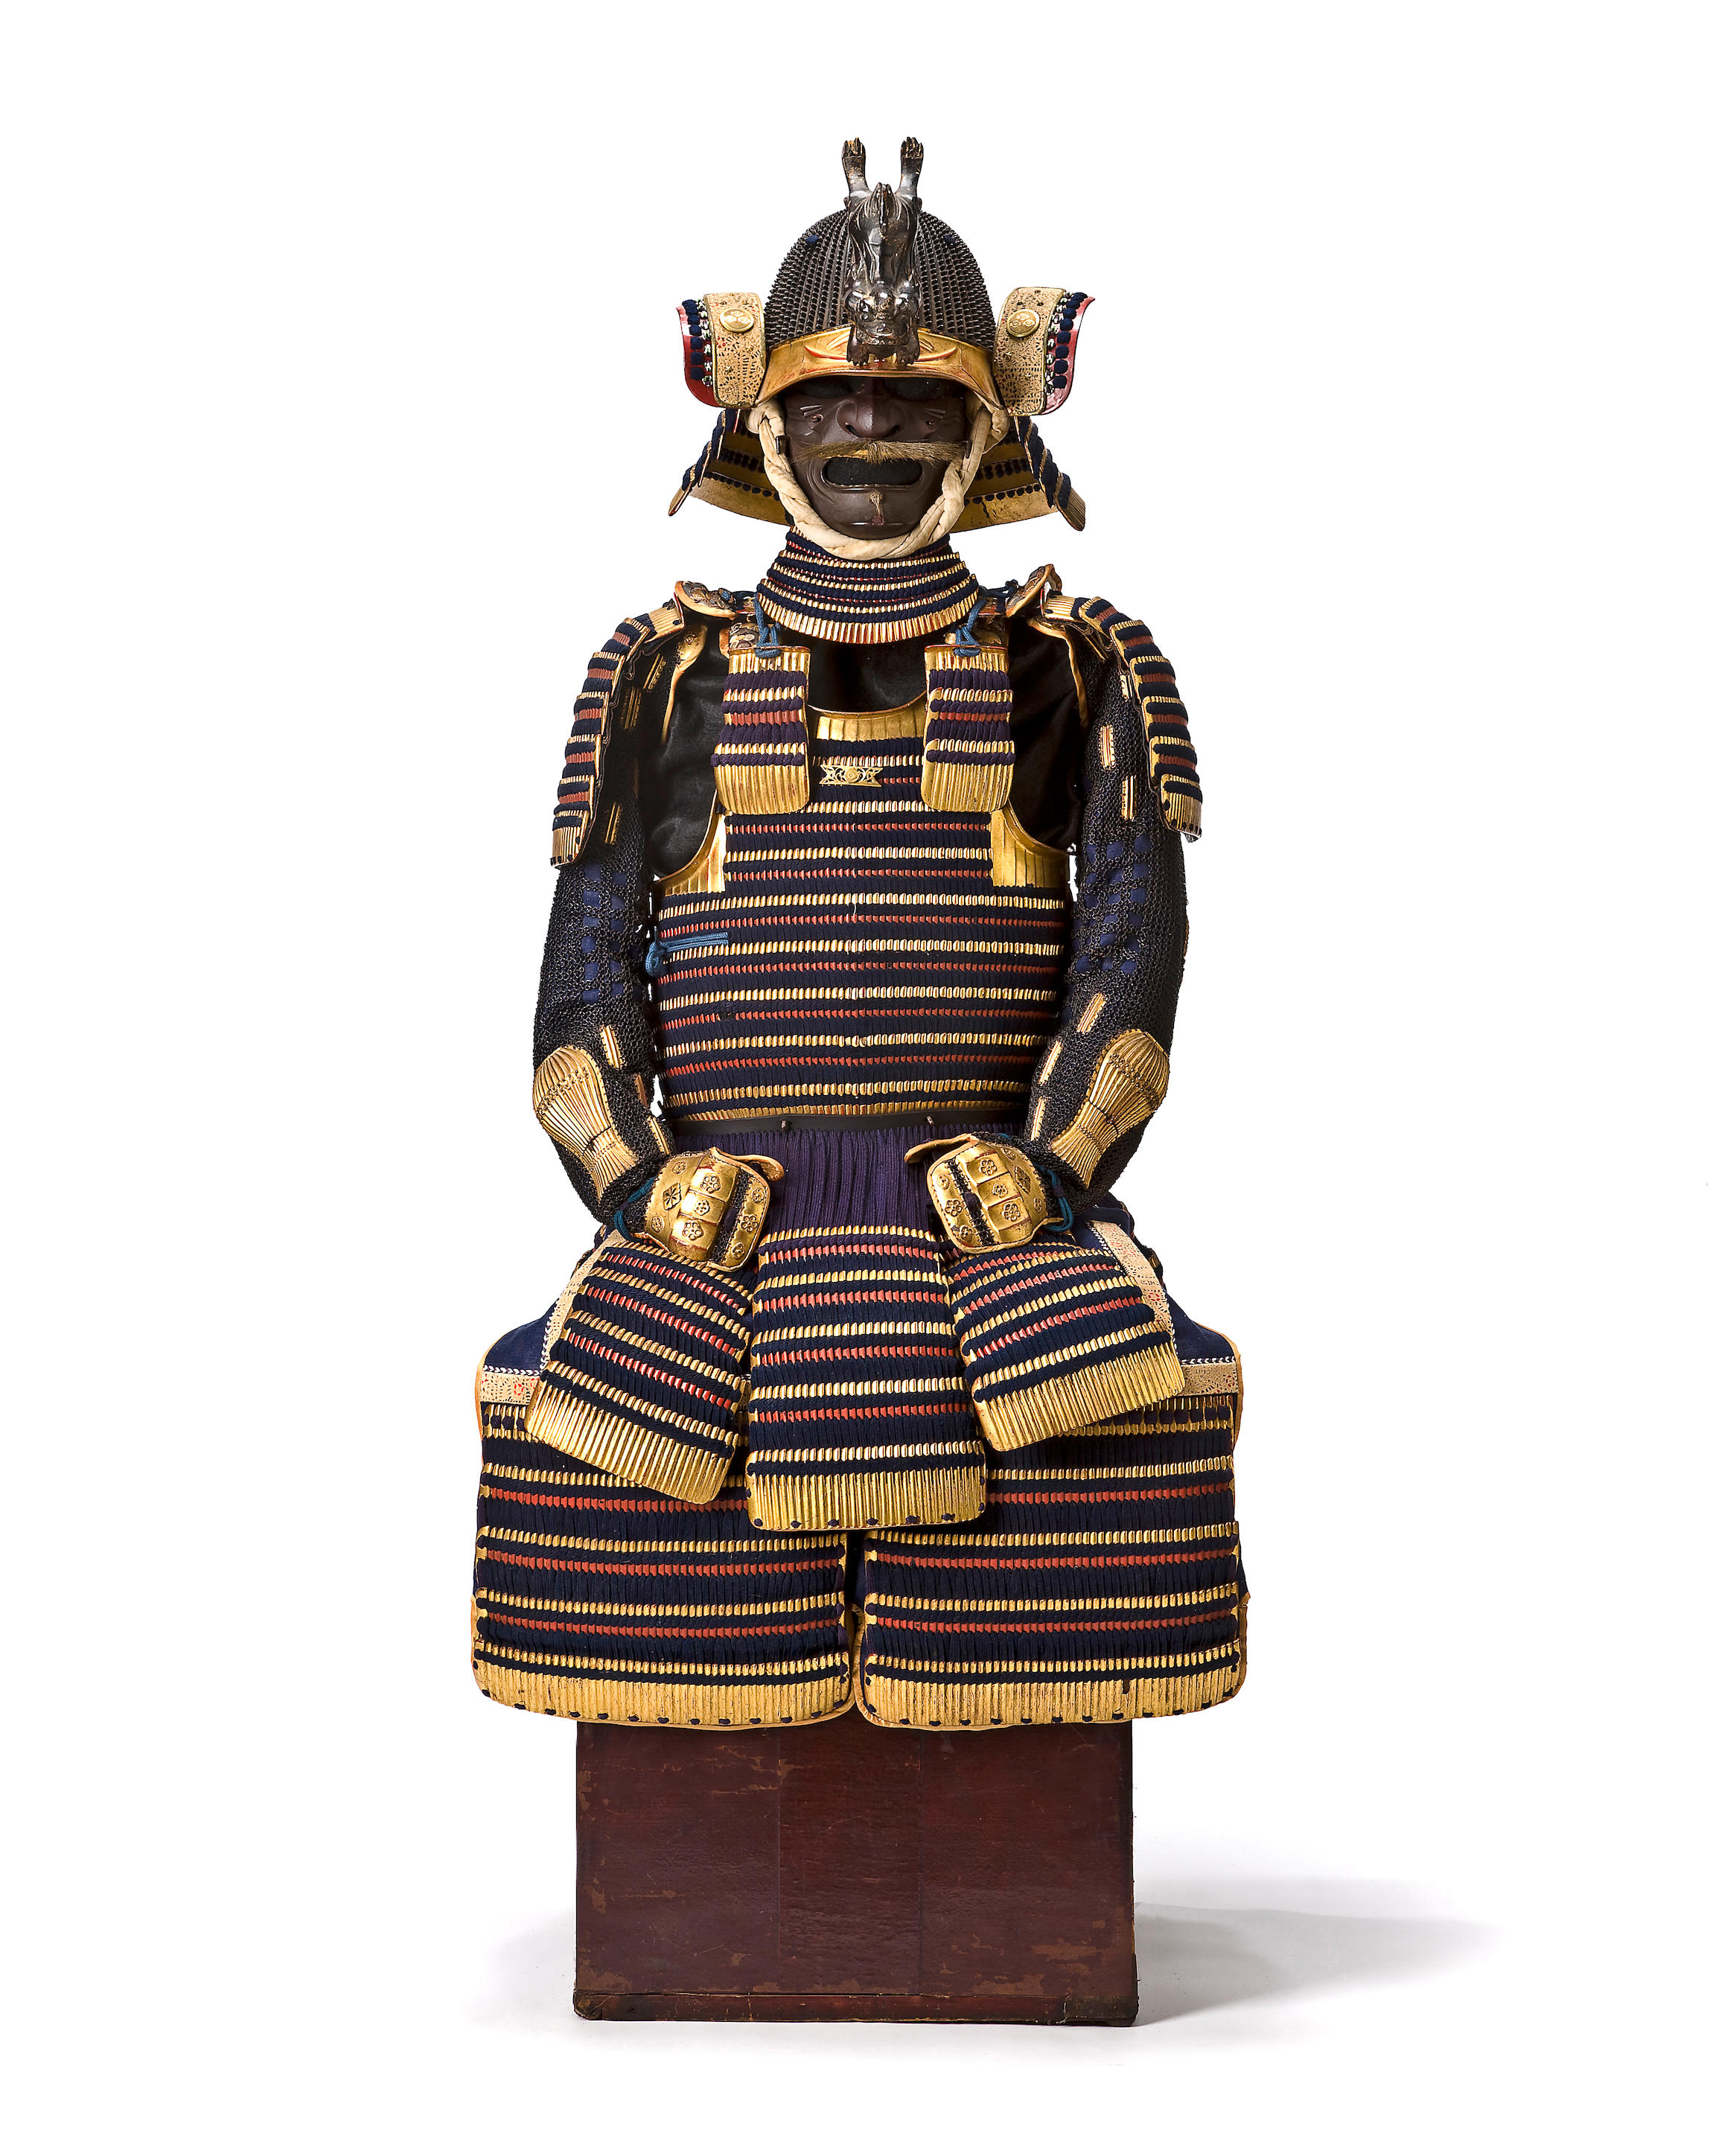 A GOLD-LACQUER SUIT OF ARMOR